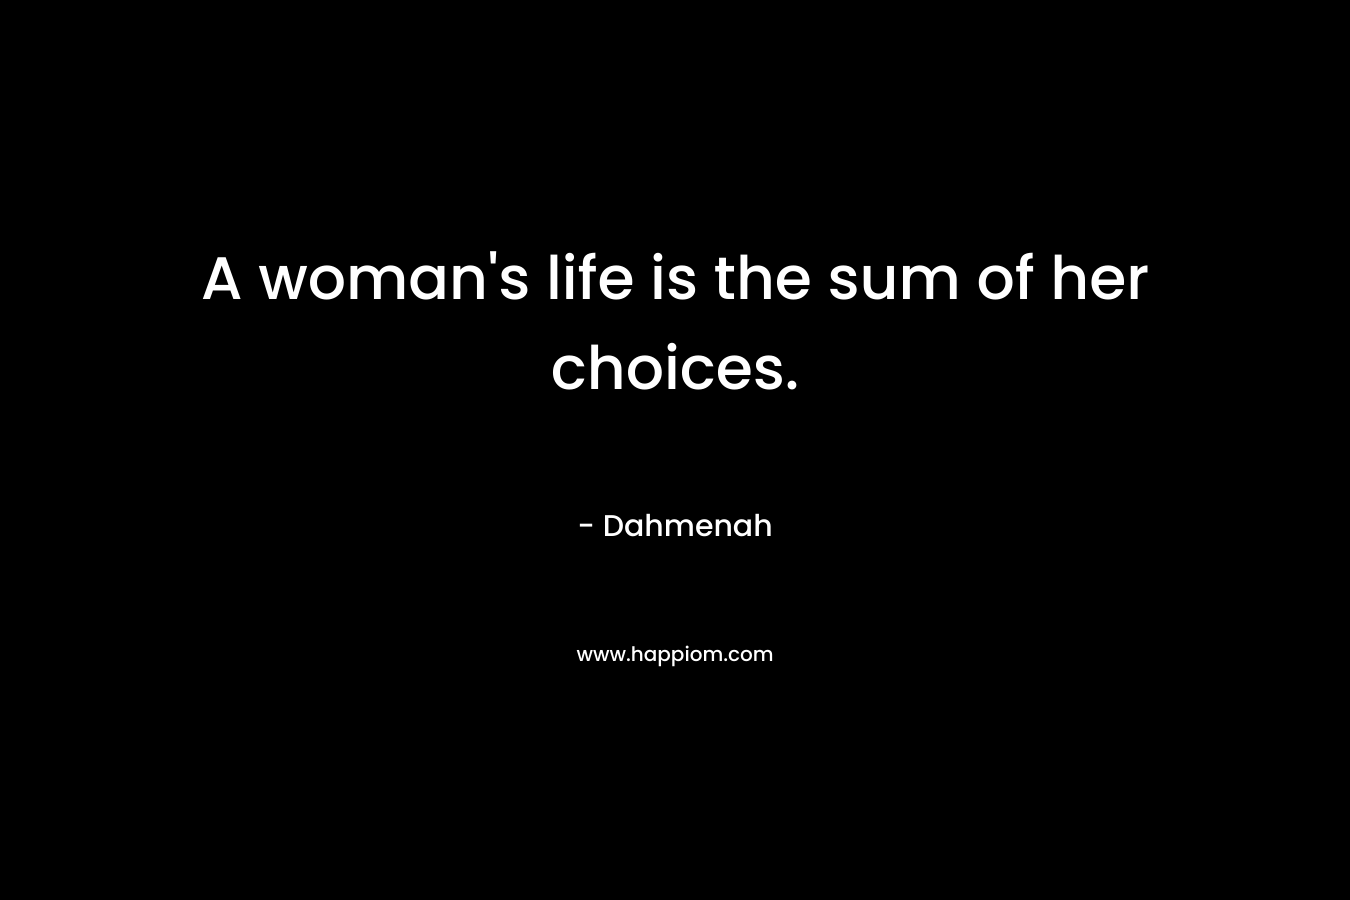 A woman’s life is the sum of her choices. – Dahmenah